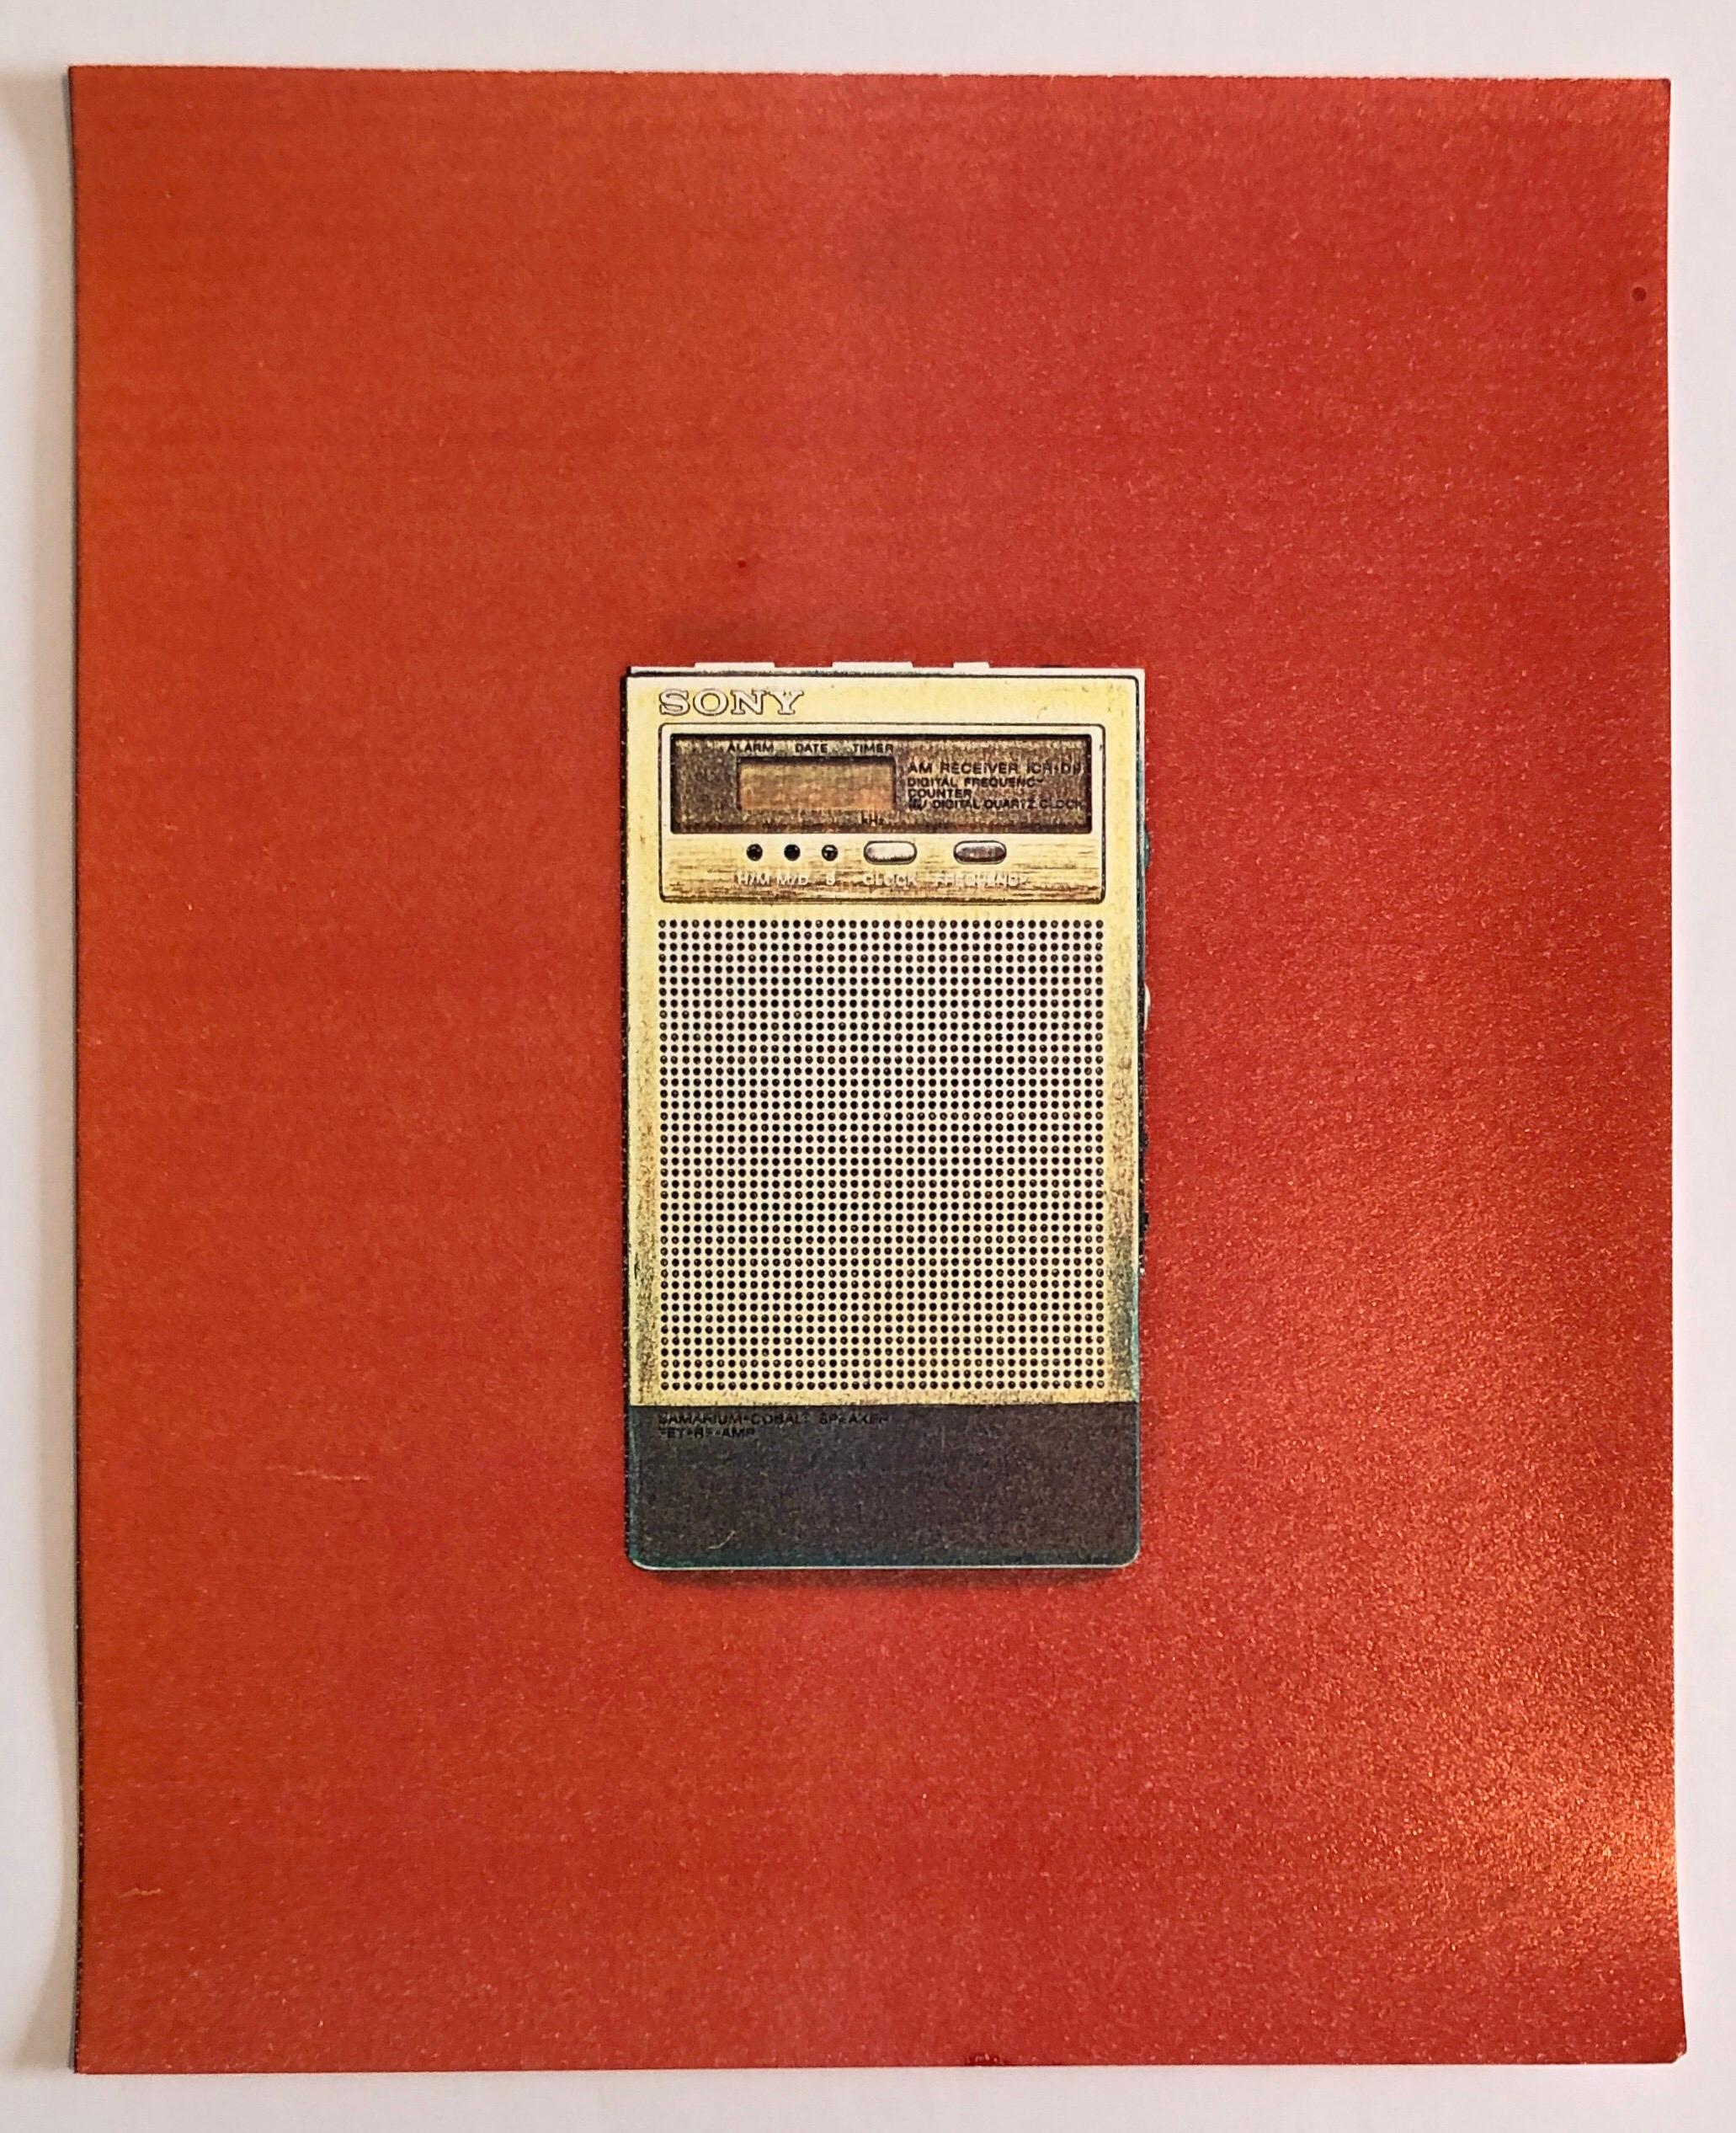 SEASONS (1981)
This is for the single print listed here. (not the outside folder or title sheet)
Title: Sony Walkman Radio. This one is hand signed and dated verso.
Seasons explores the seasons of Man, Woman, Child, Civilization, Nature and